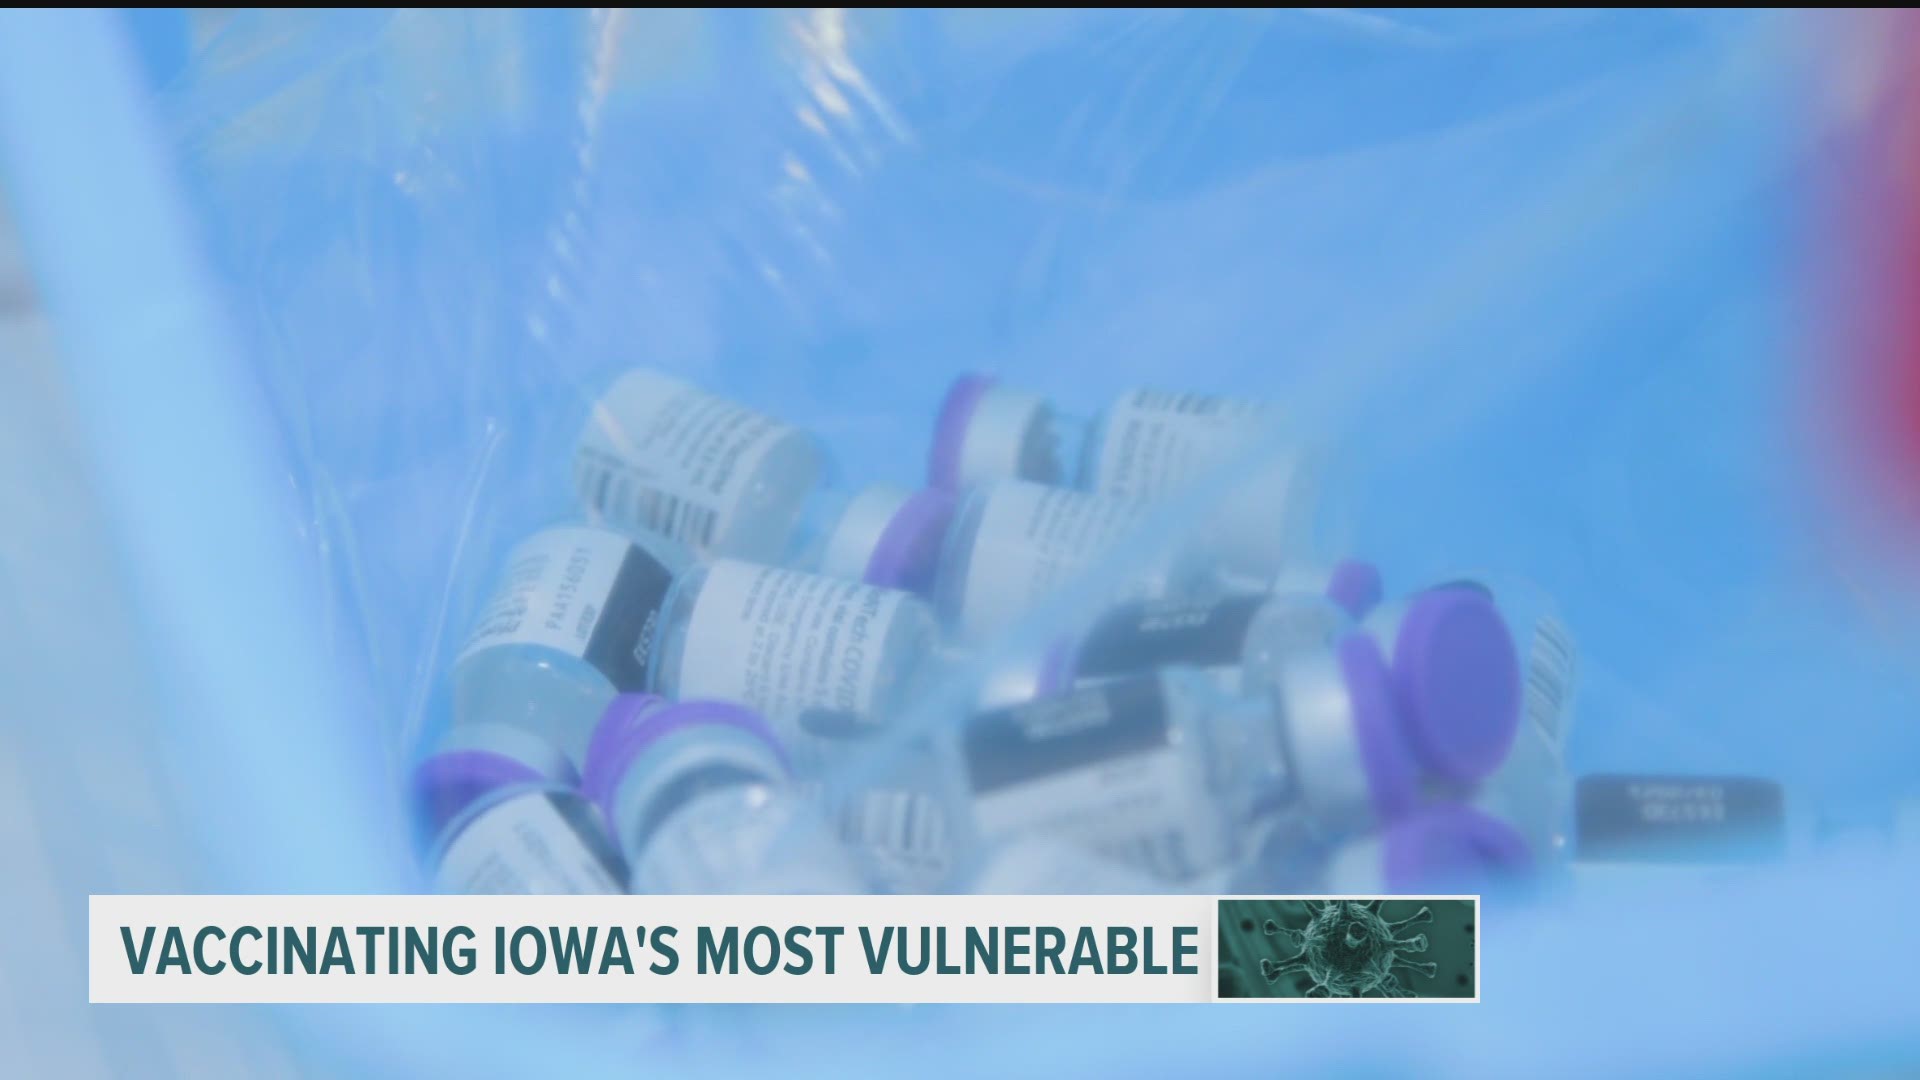 Iowa will start vaccinating long-term care residents and staff starting Dec. 28.